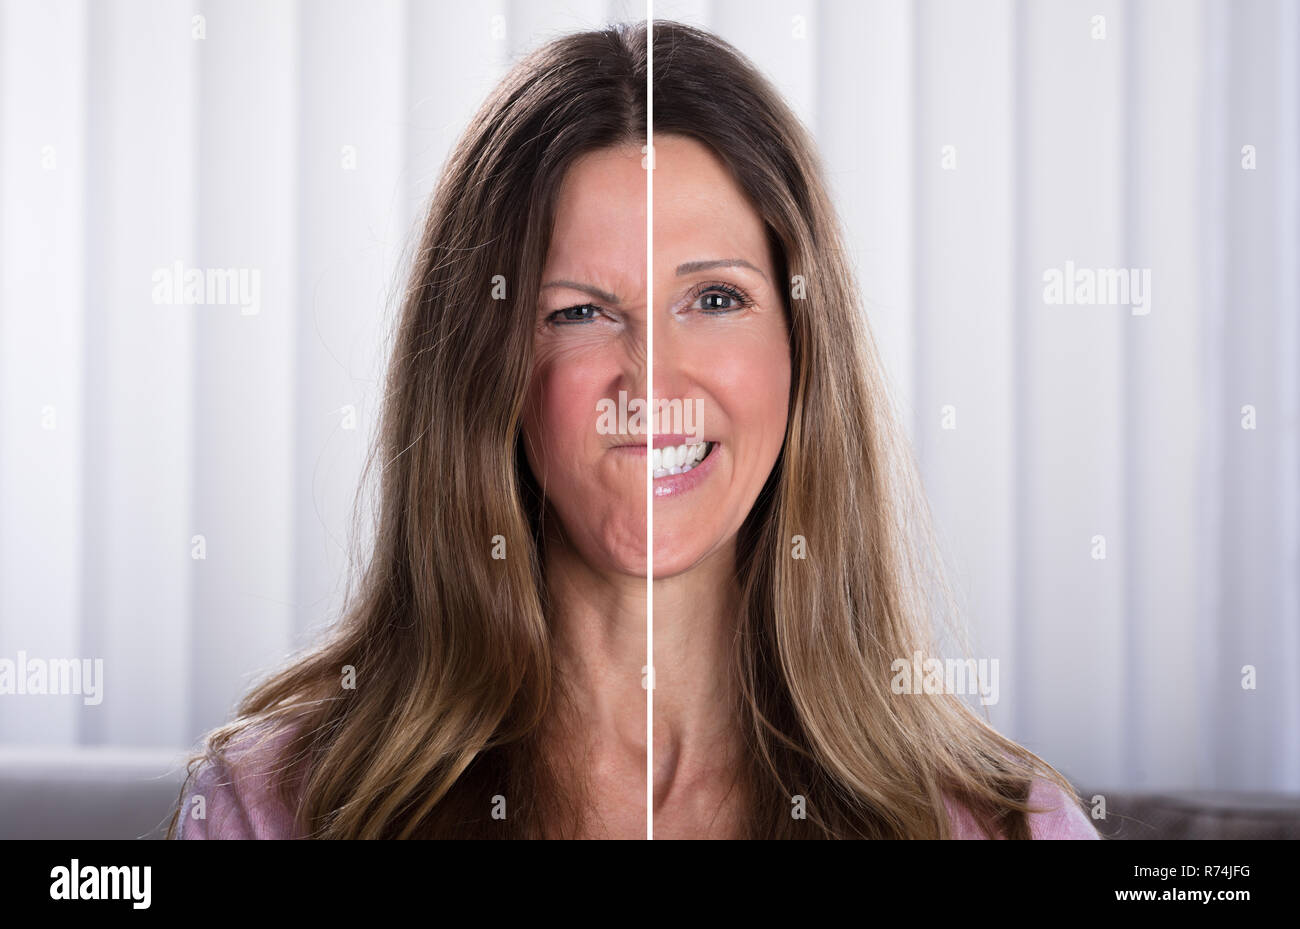 Woman's Split Face With Happy And Sad Emotion Stock Photo